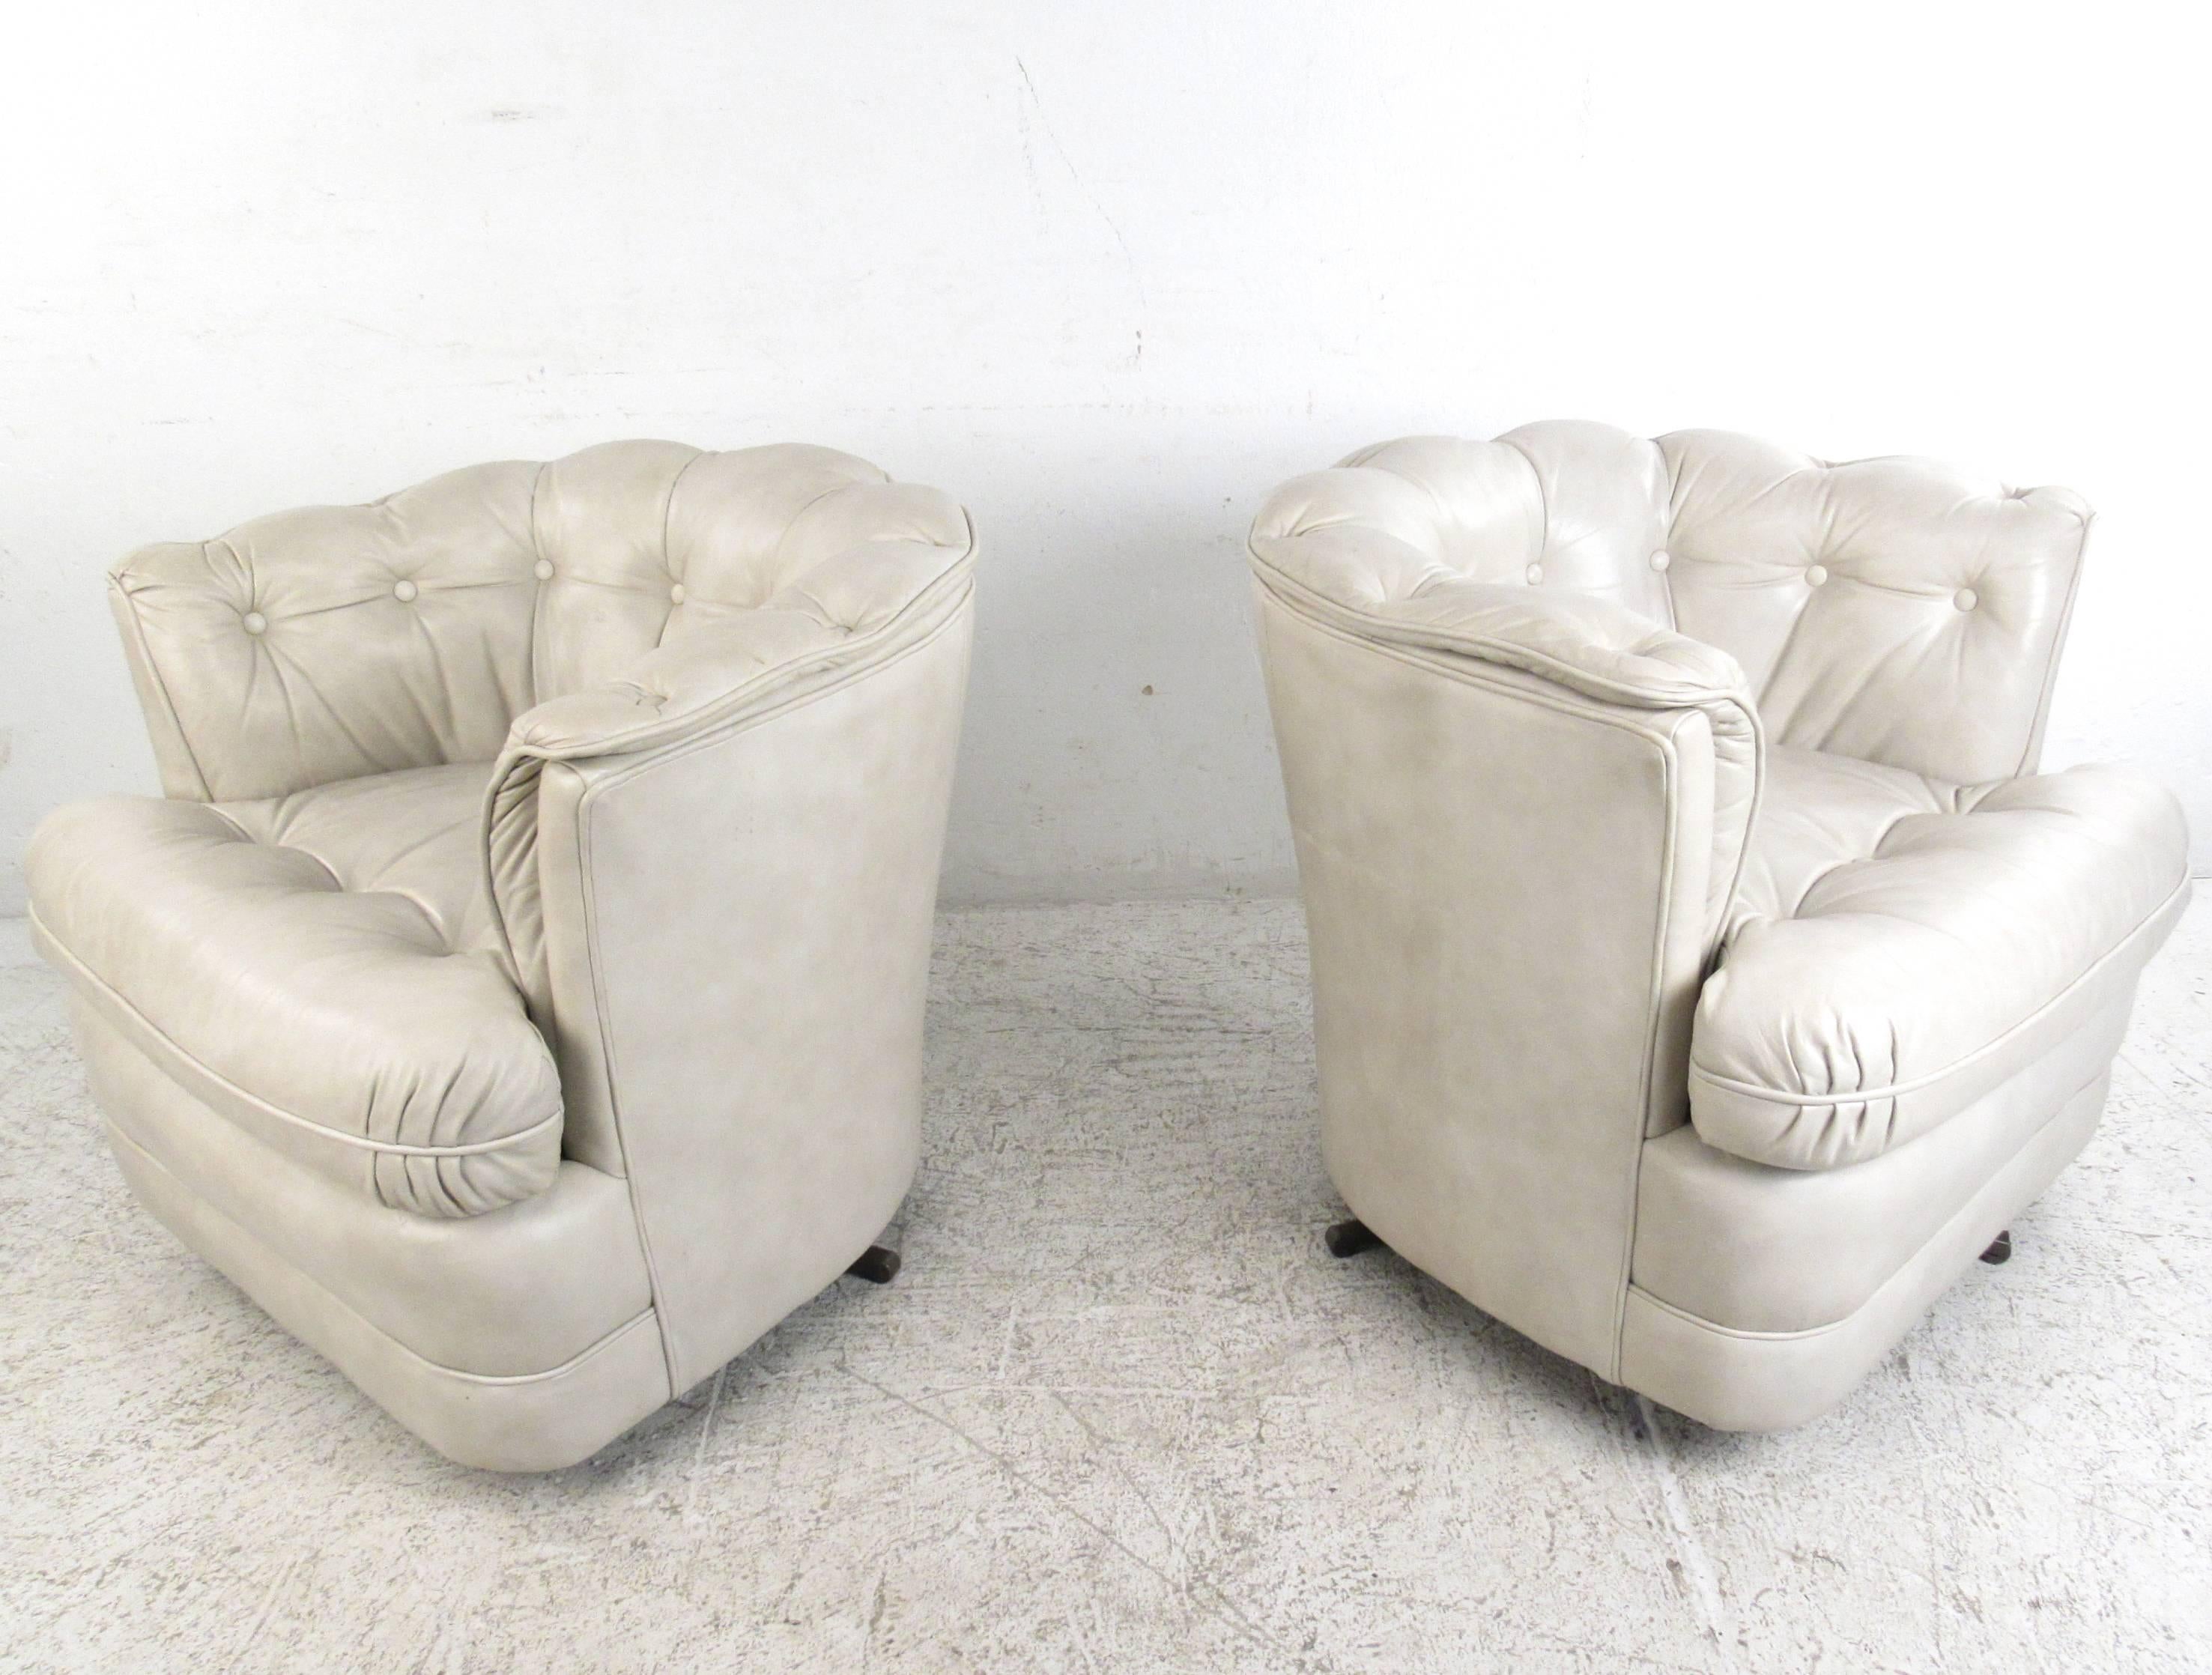 American Pair of Vintage Tufted Leather Swivel Lounge Chairs, Mid-Century Modern